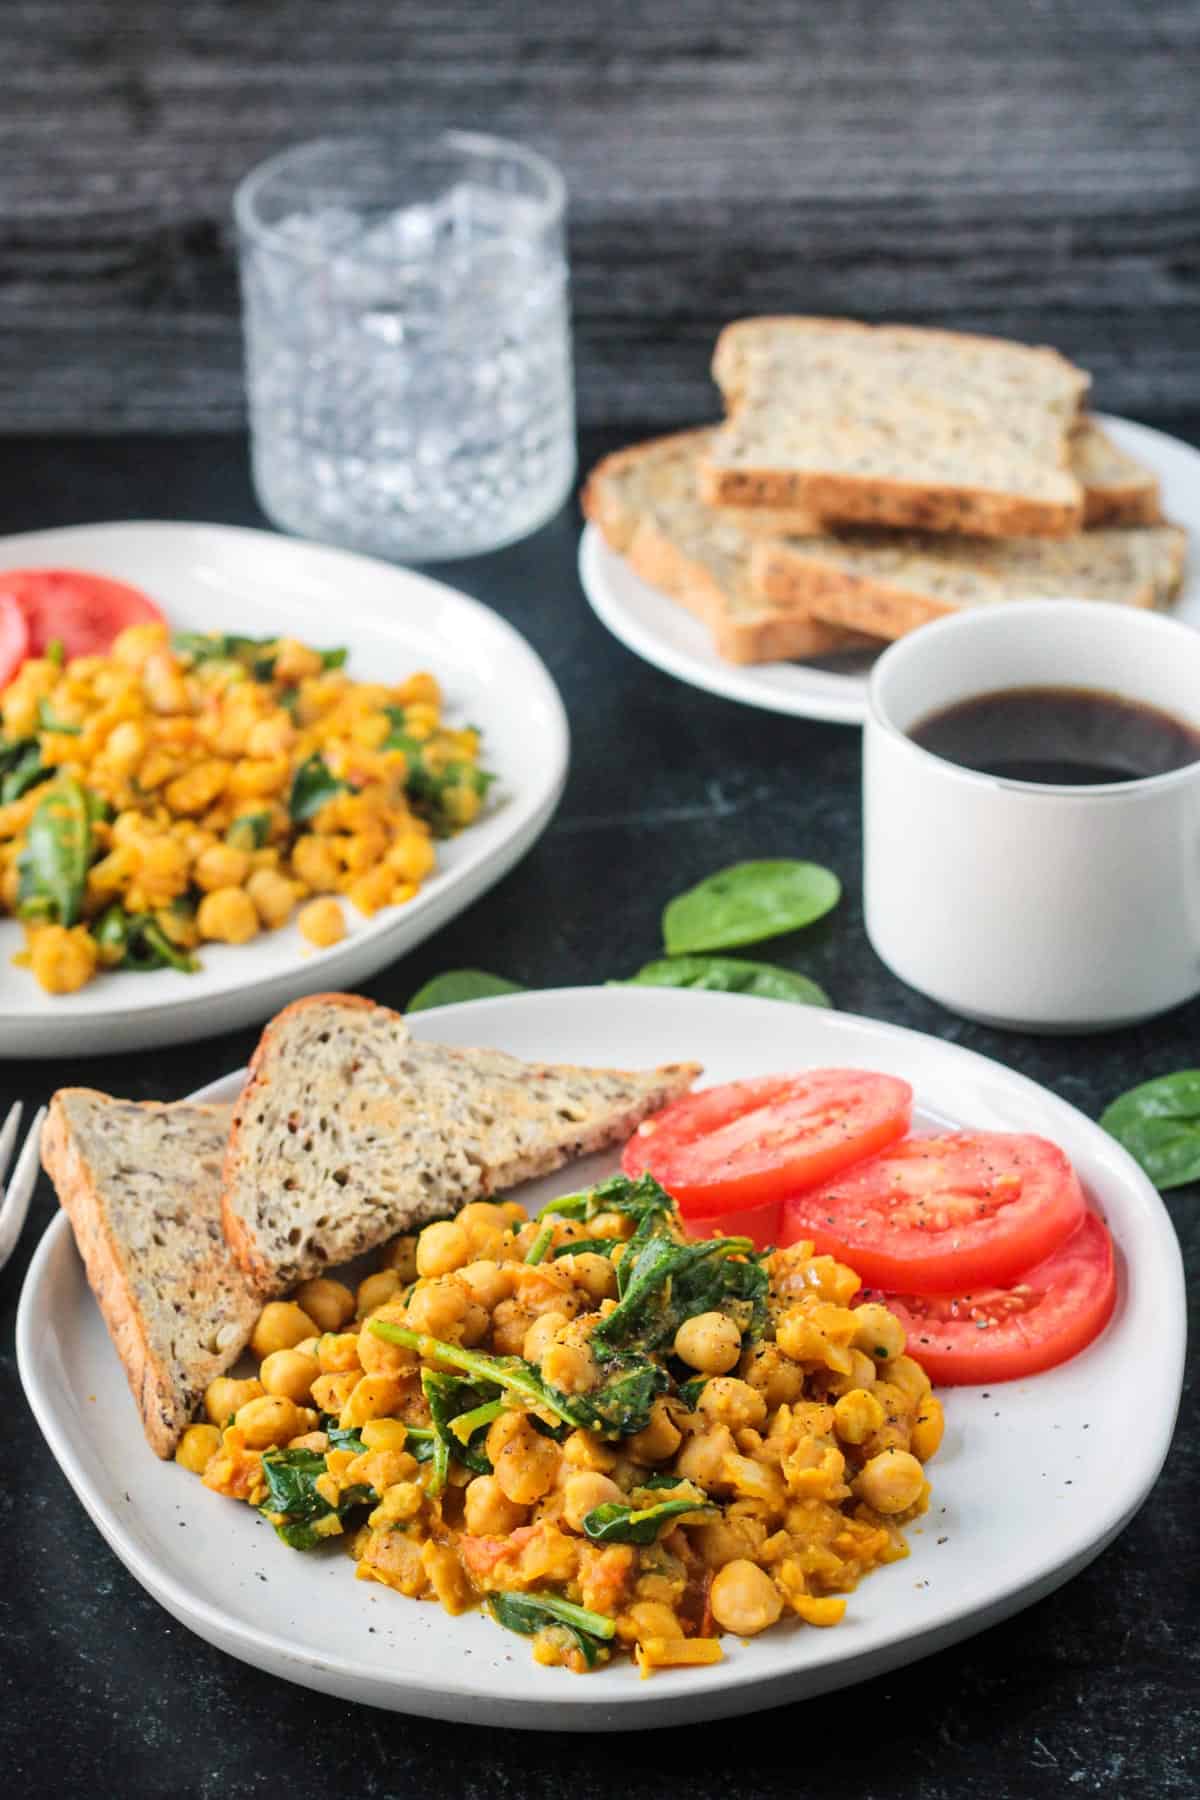 Serving of sautéed chickpeas and spinach next to a cup of coffee.